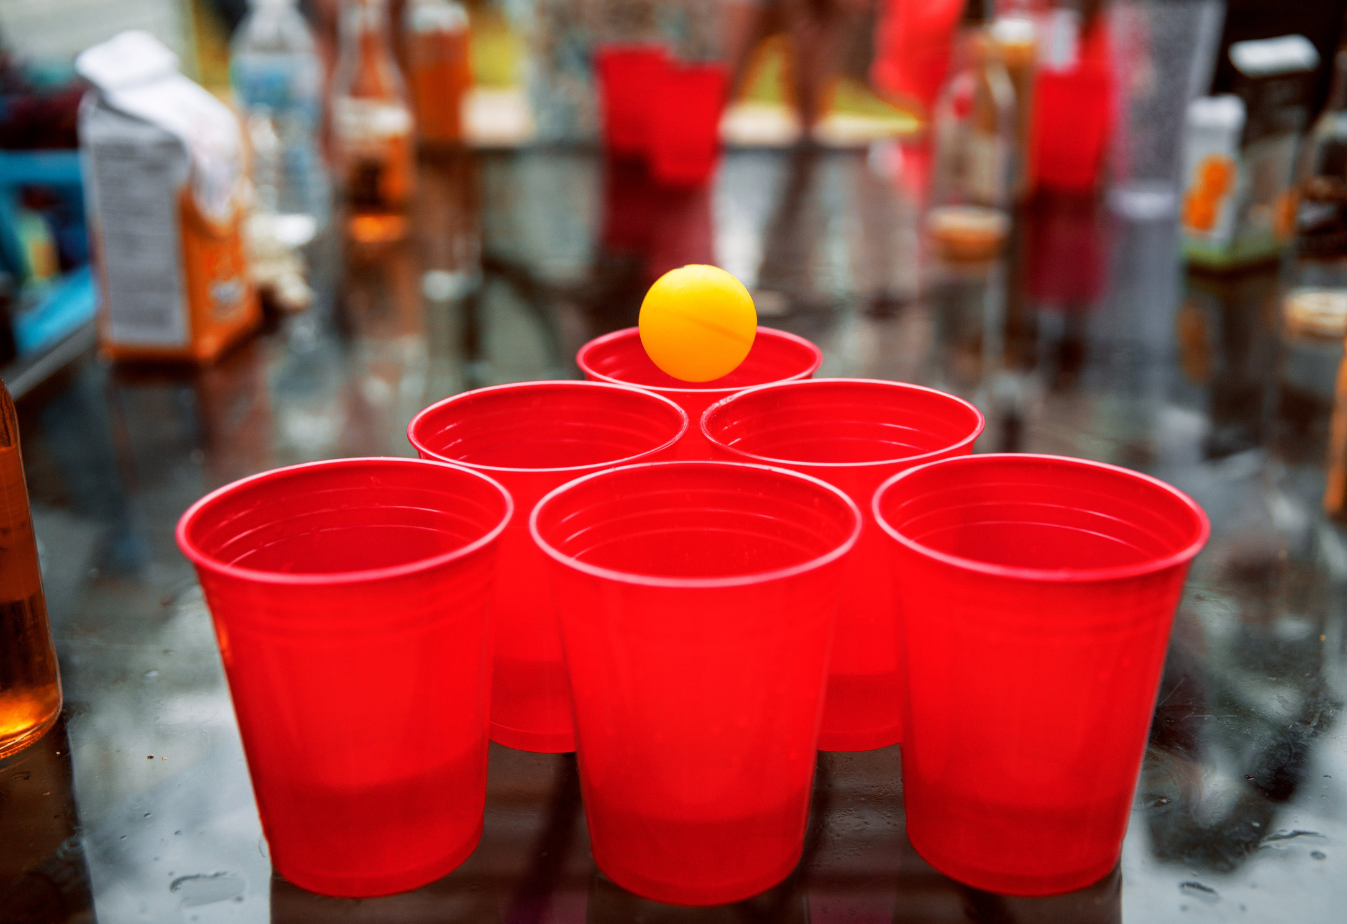 6 red cups in a triangle with a ping pong ball above one cup, alcohol bottles in the background blurred